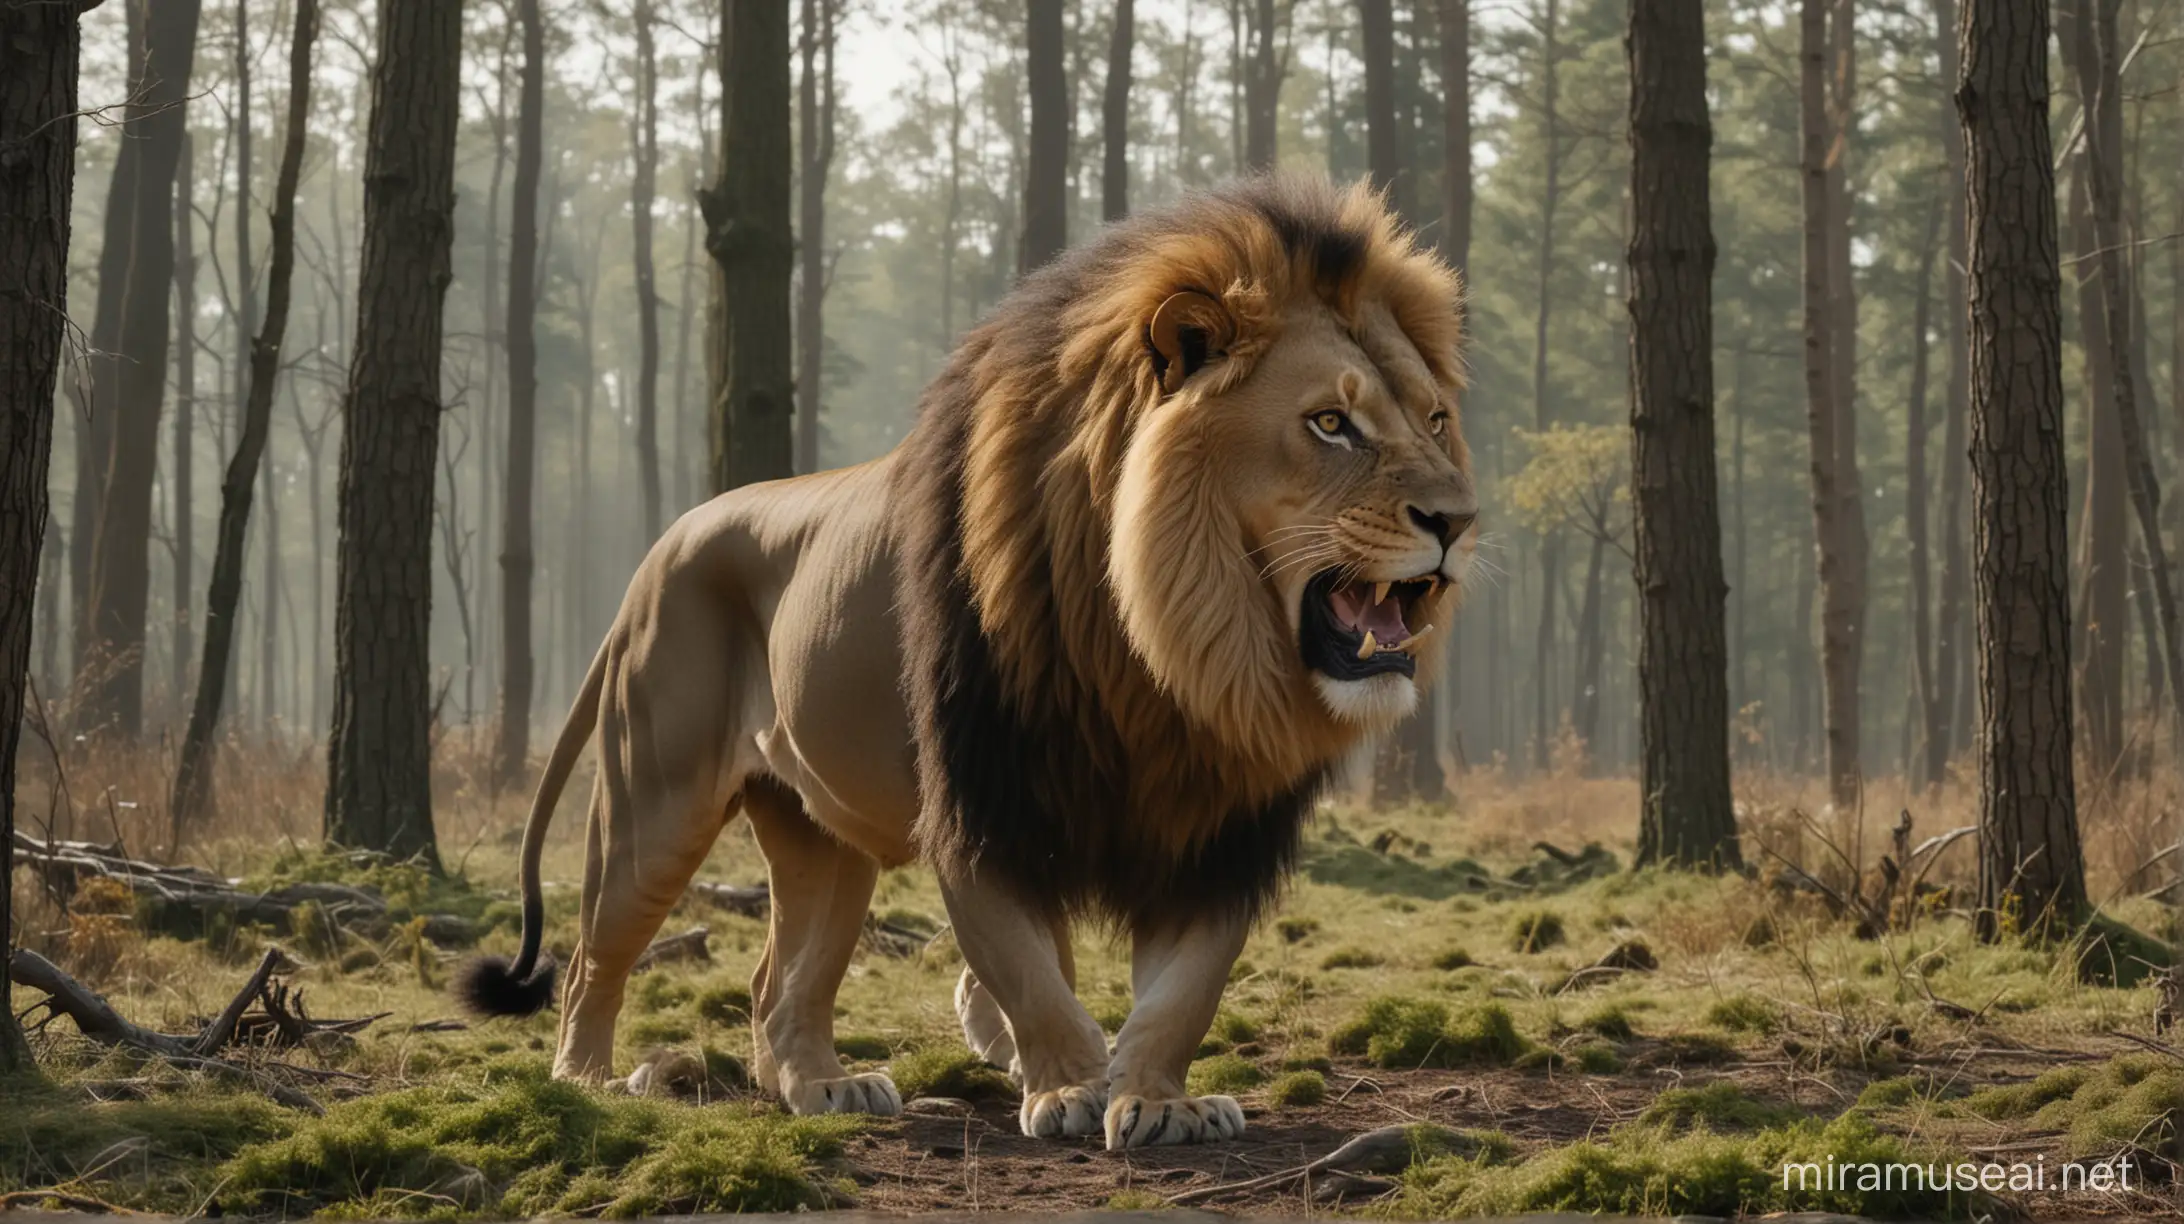 A big and strong lion roars in the forest, in a beautiful place